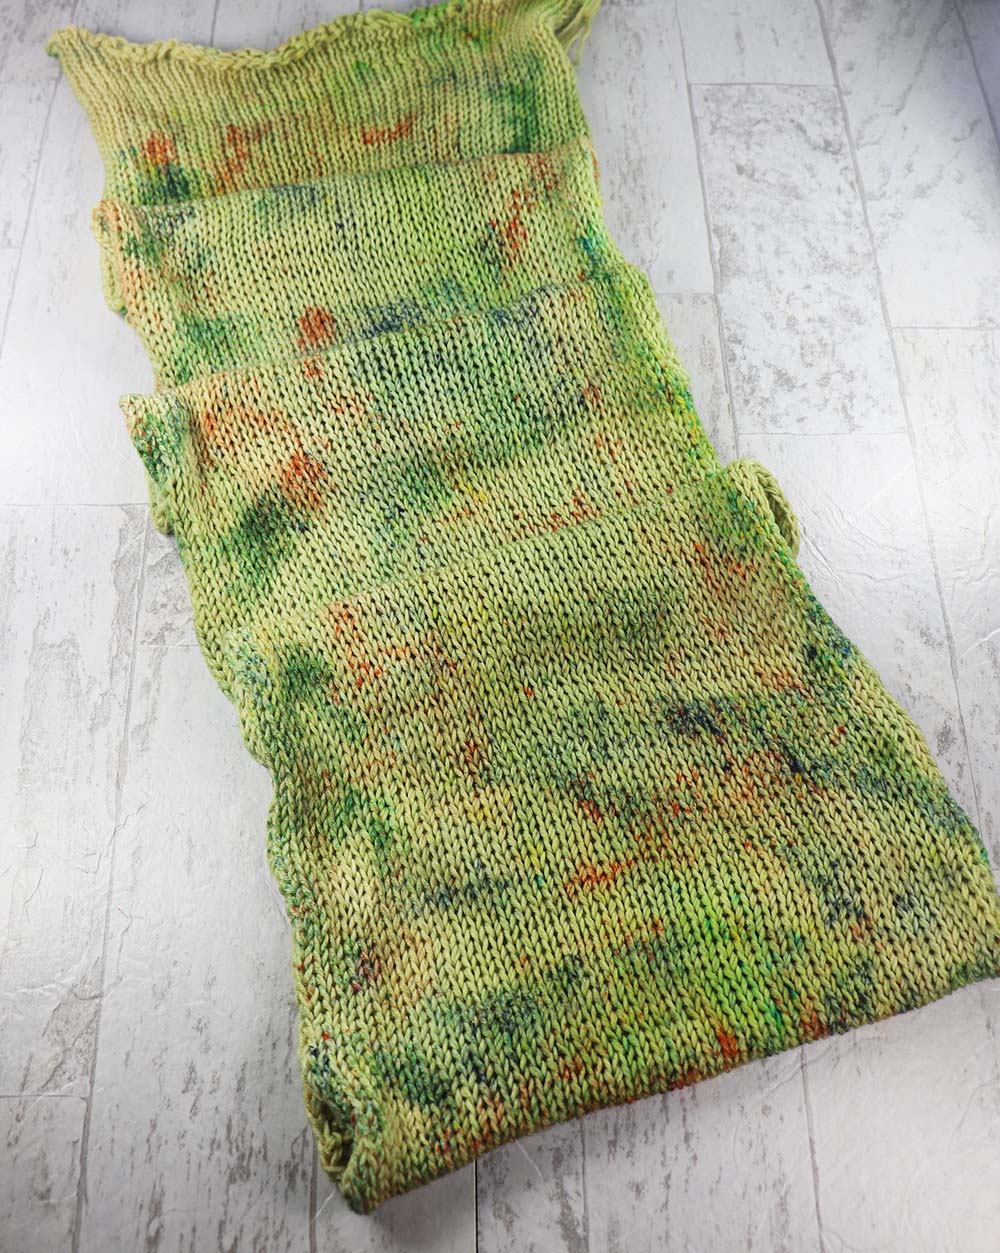 STAINED GLASS ROTUNDA: SW Merino/Nylon - Hand dyed Variegated Double-knit sock blank